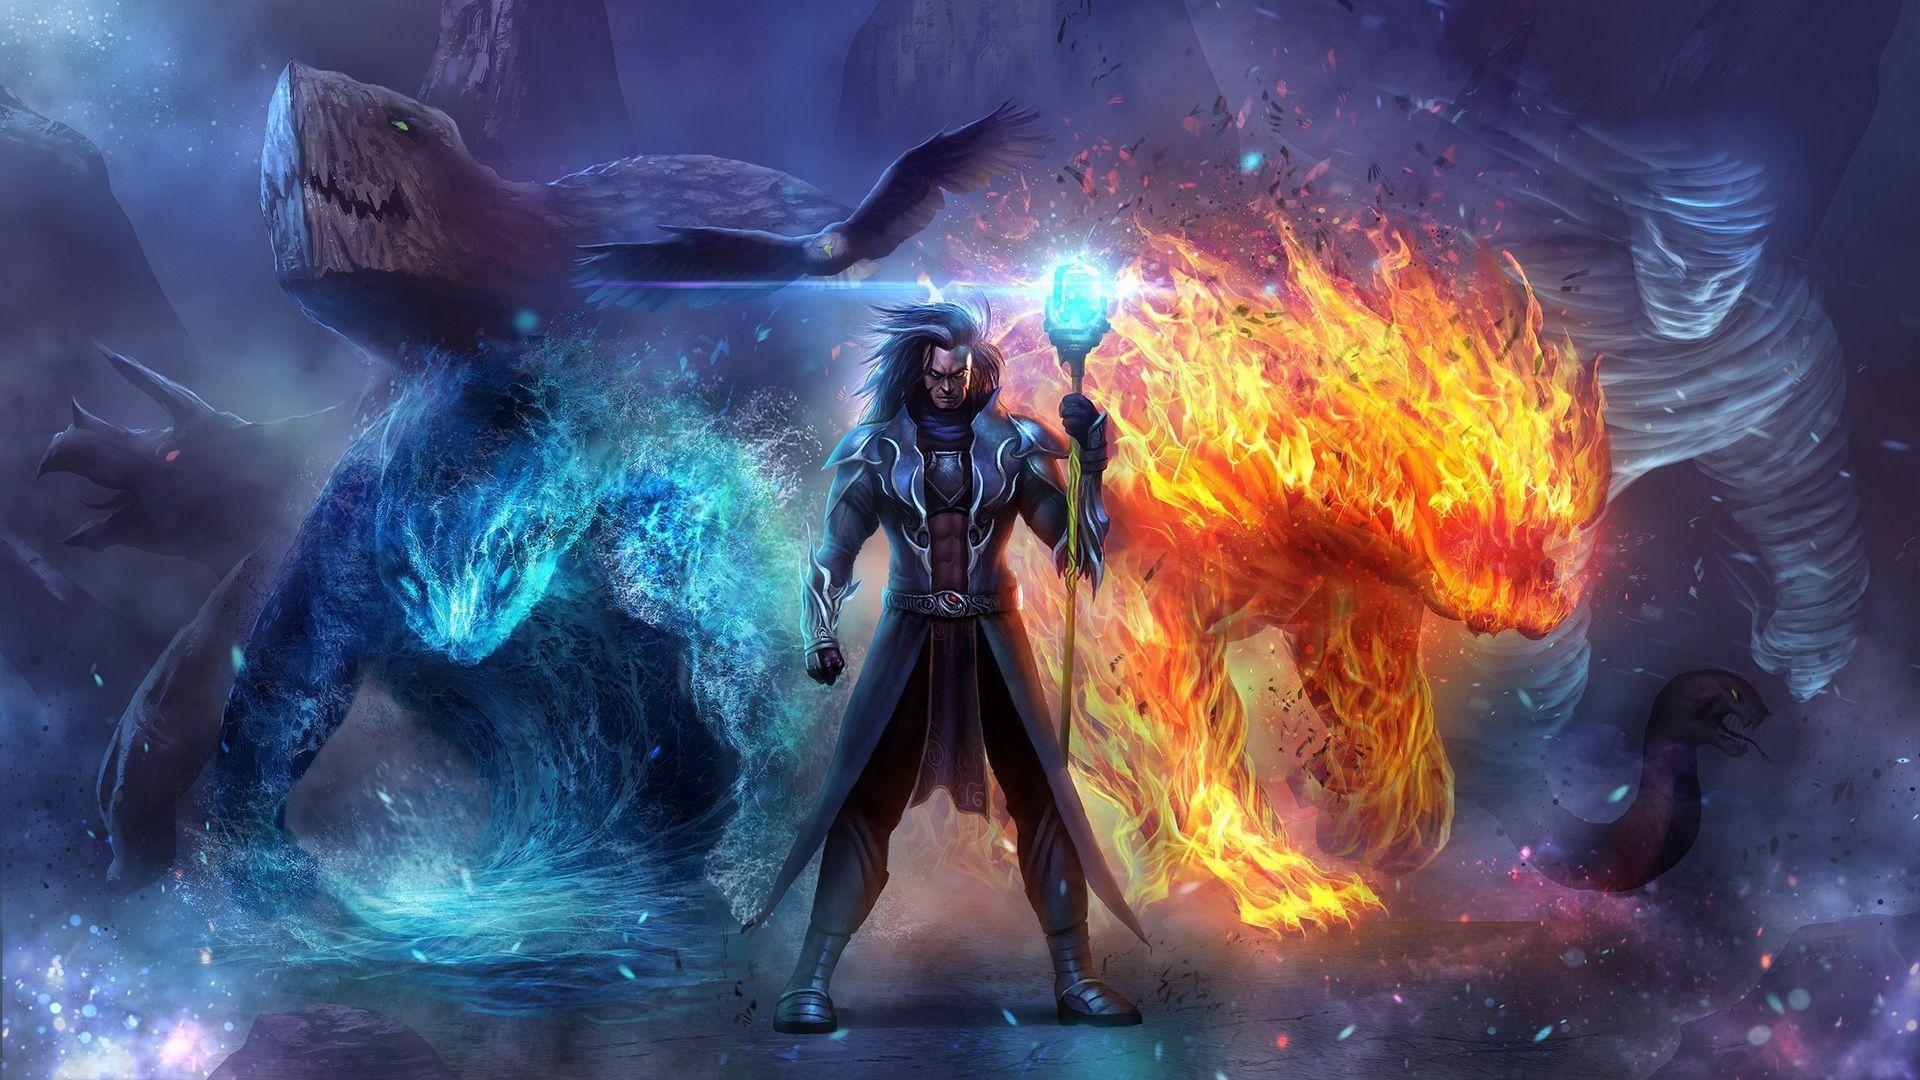 HD Wizard in ice and fire Wallpaper